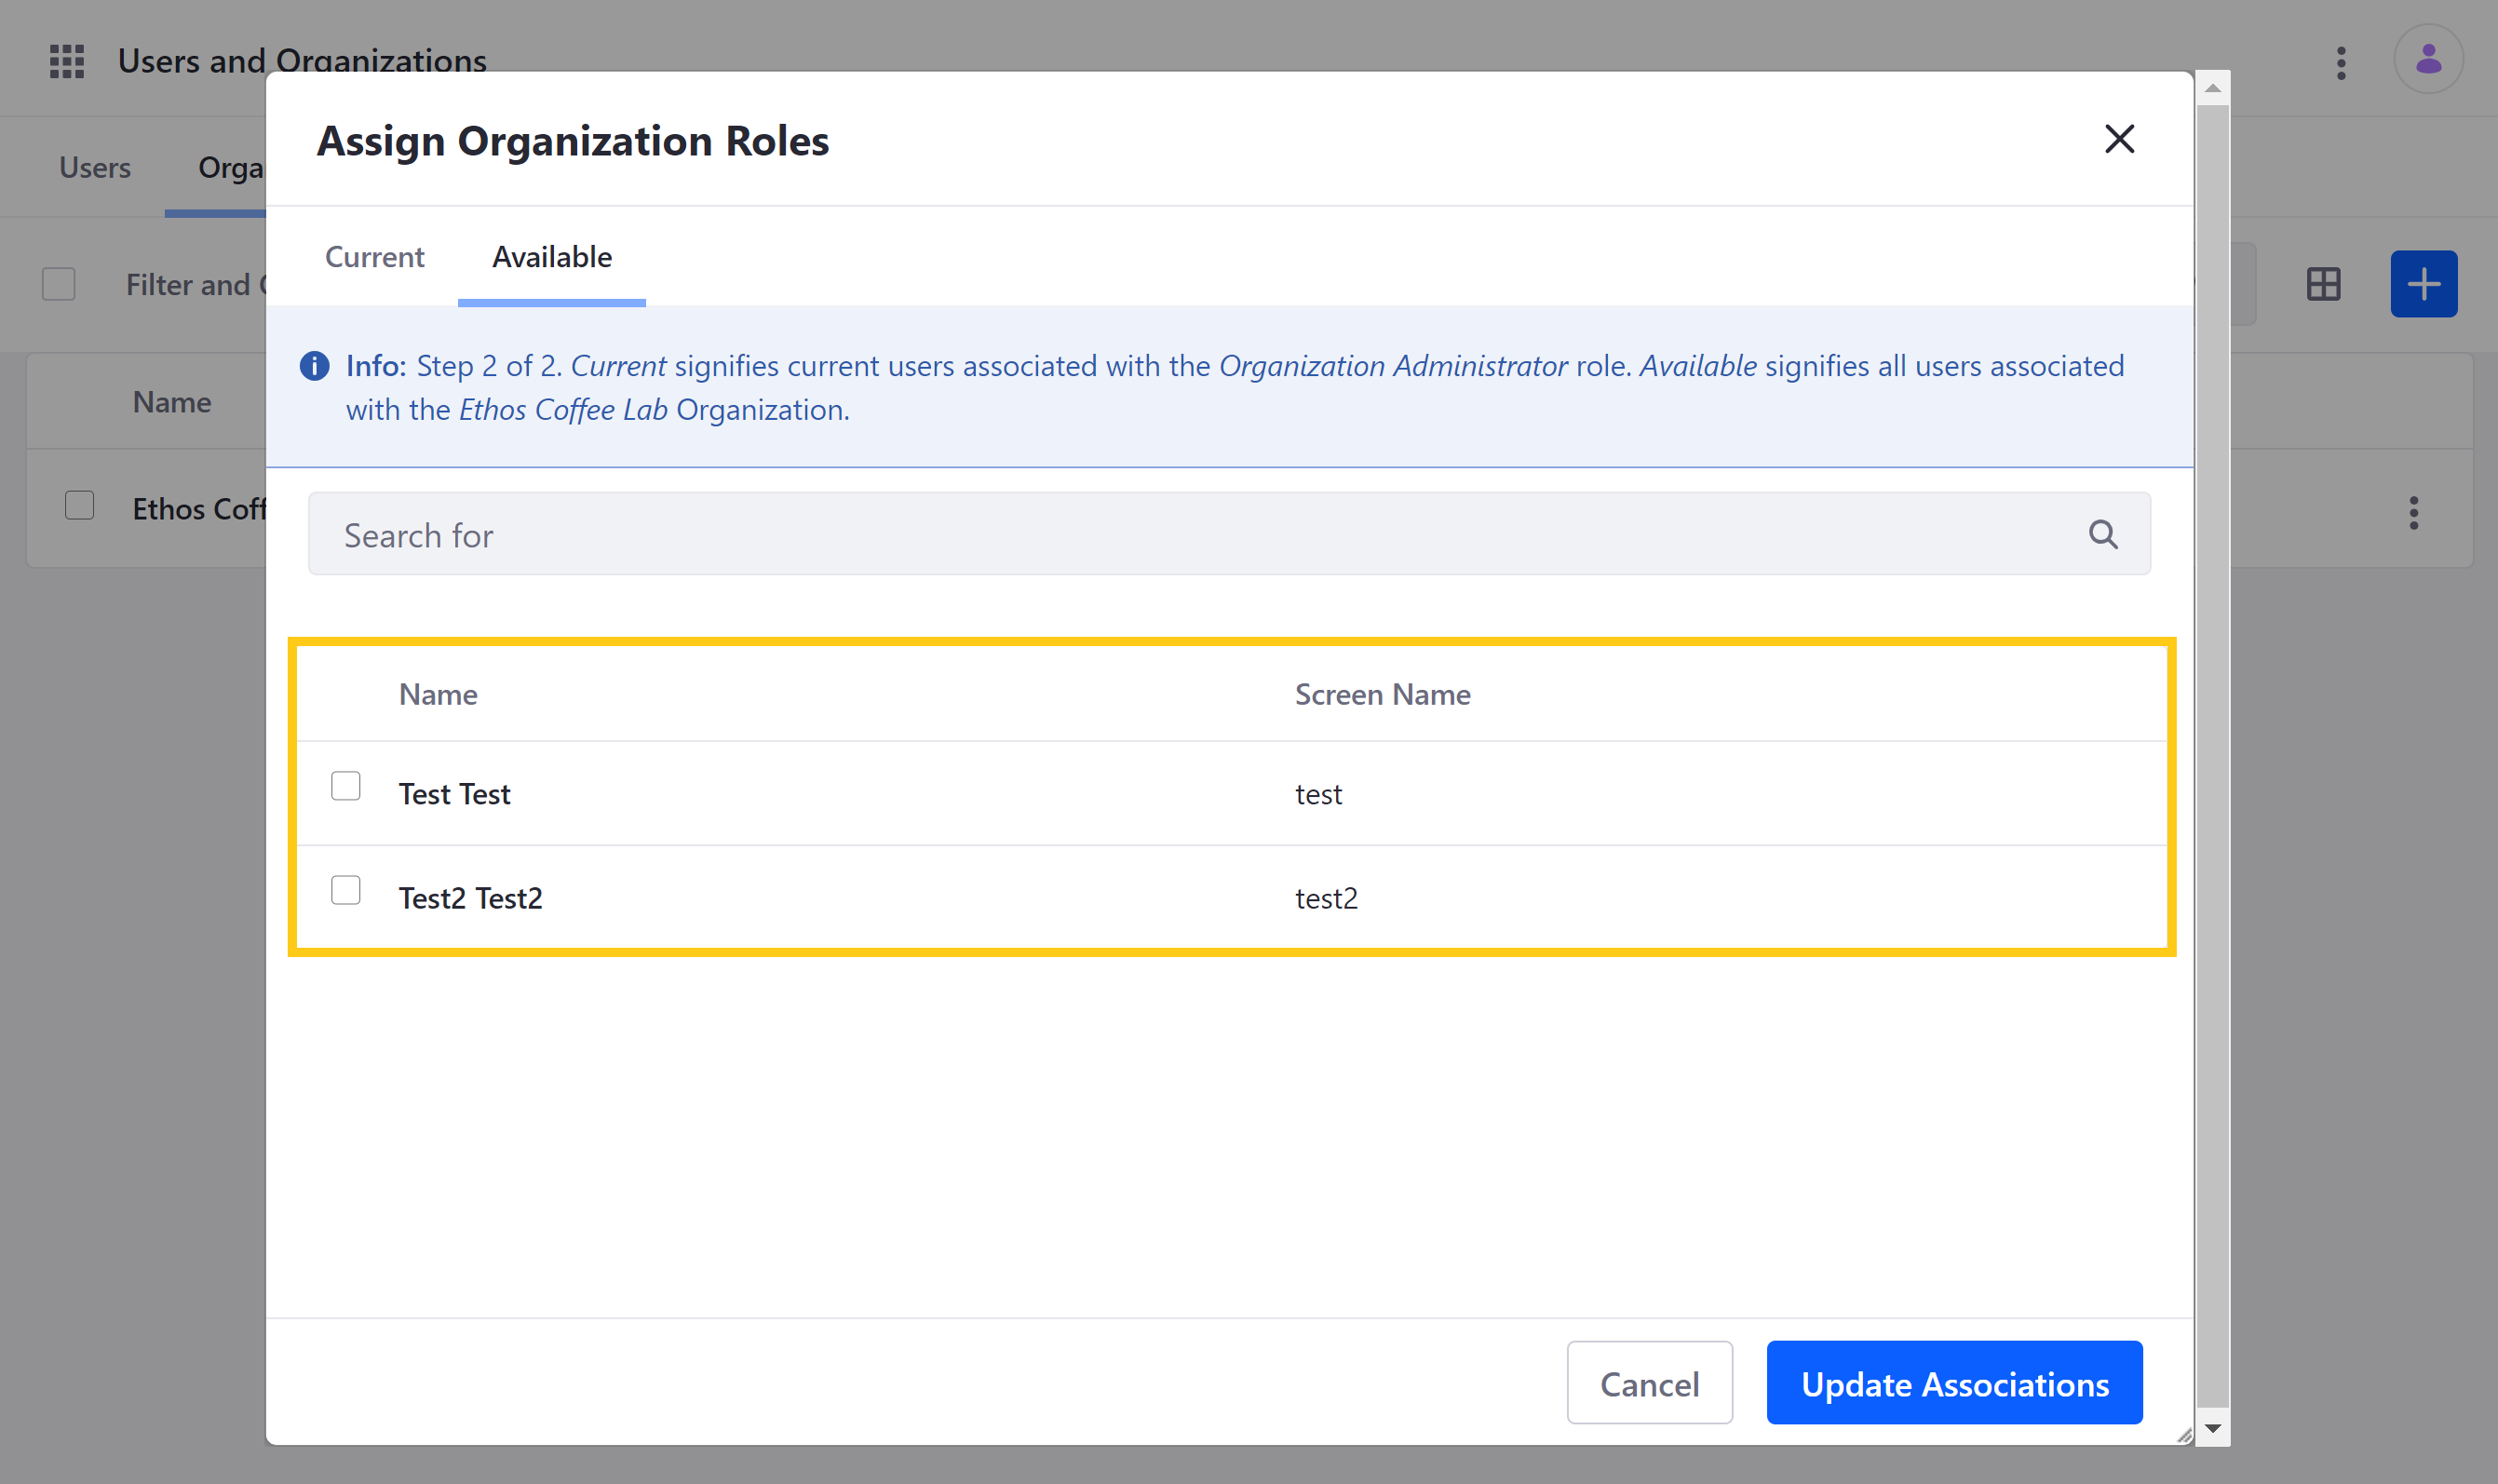 Use the checkboxes to select which Users are assigned the role.